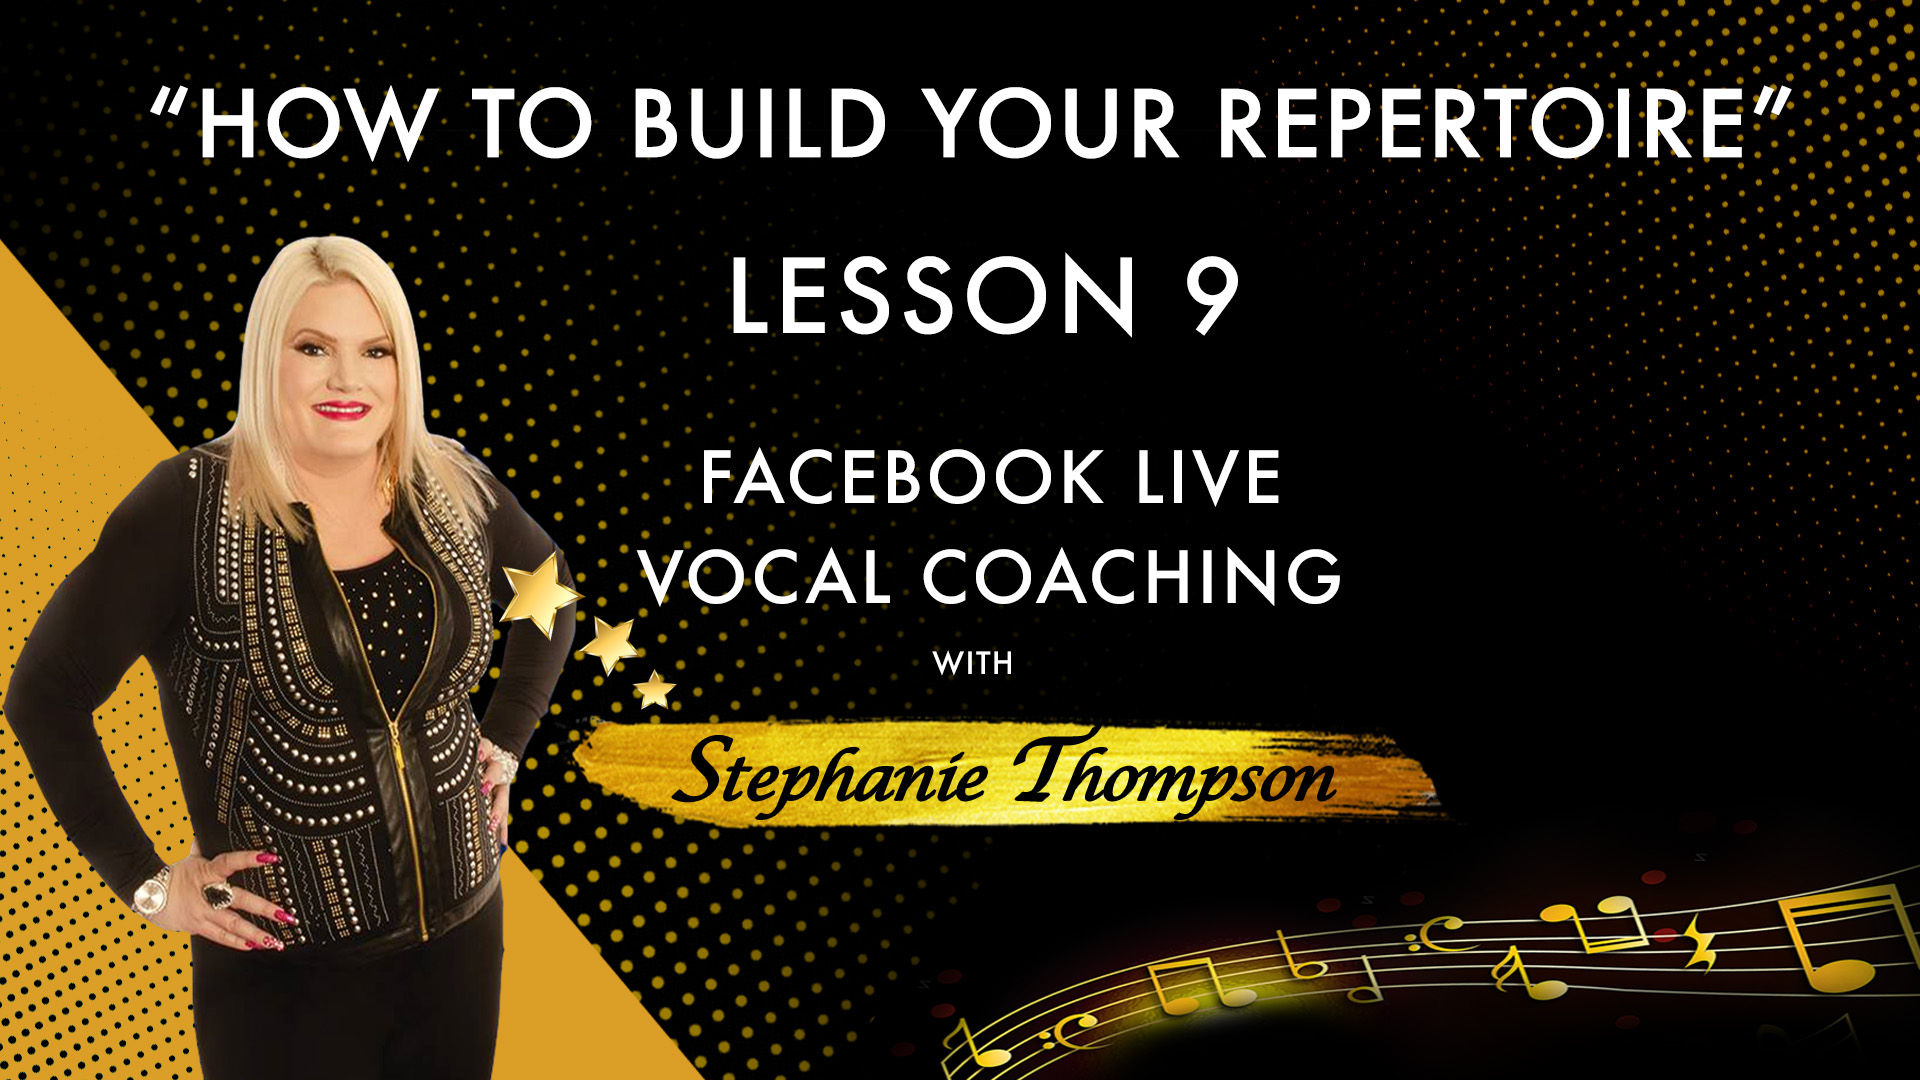 Lesson 9 - How to Build Your Repertoire